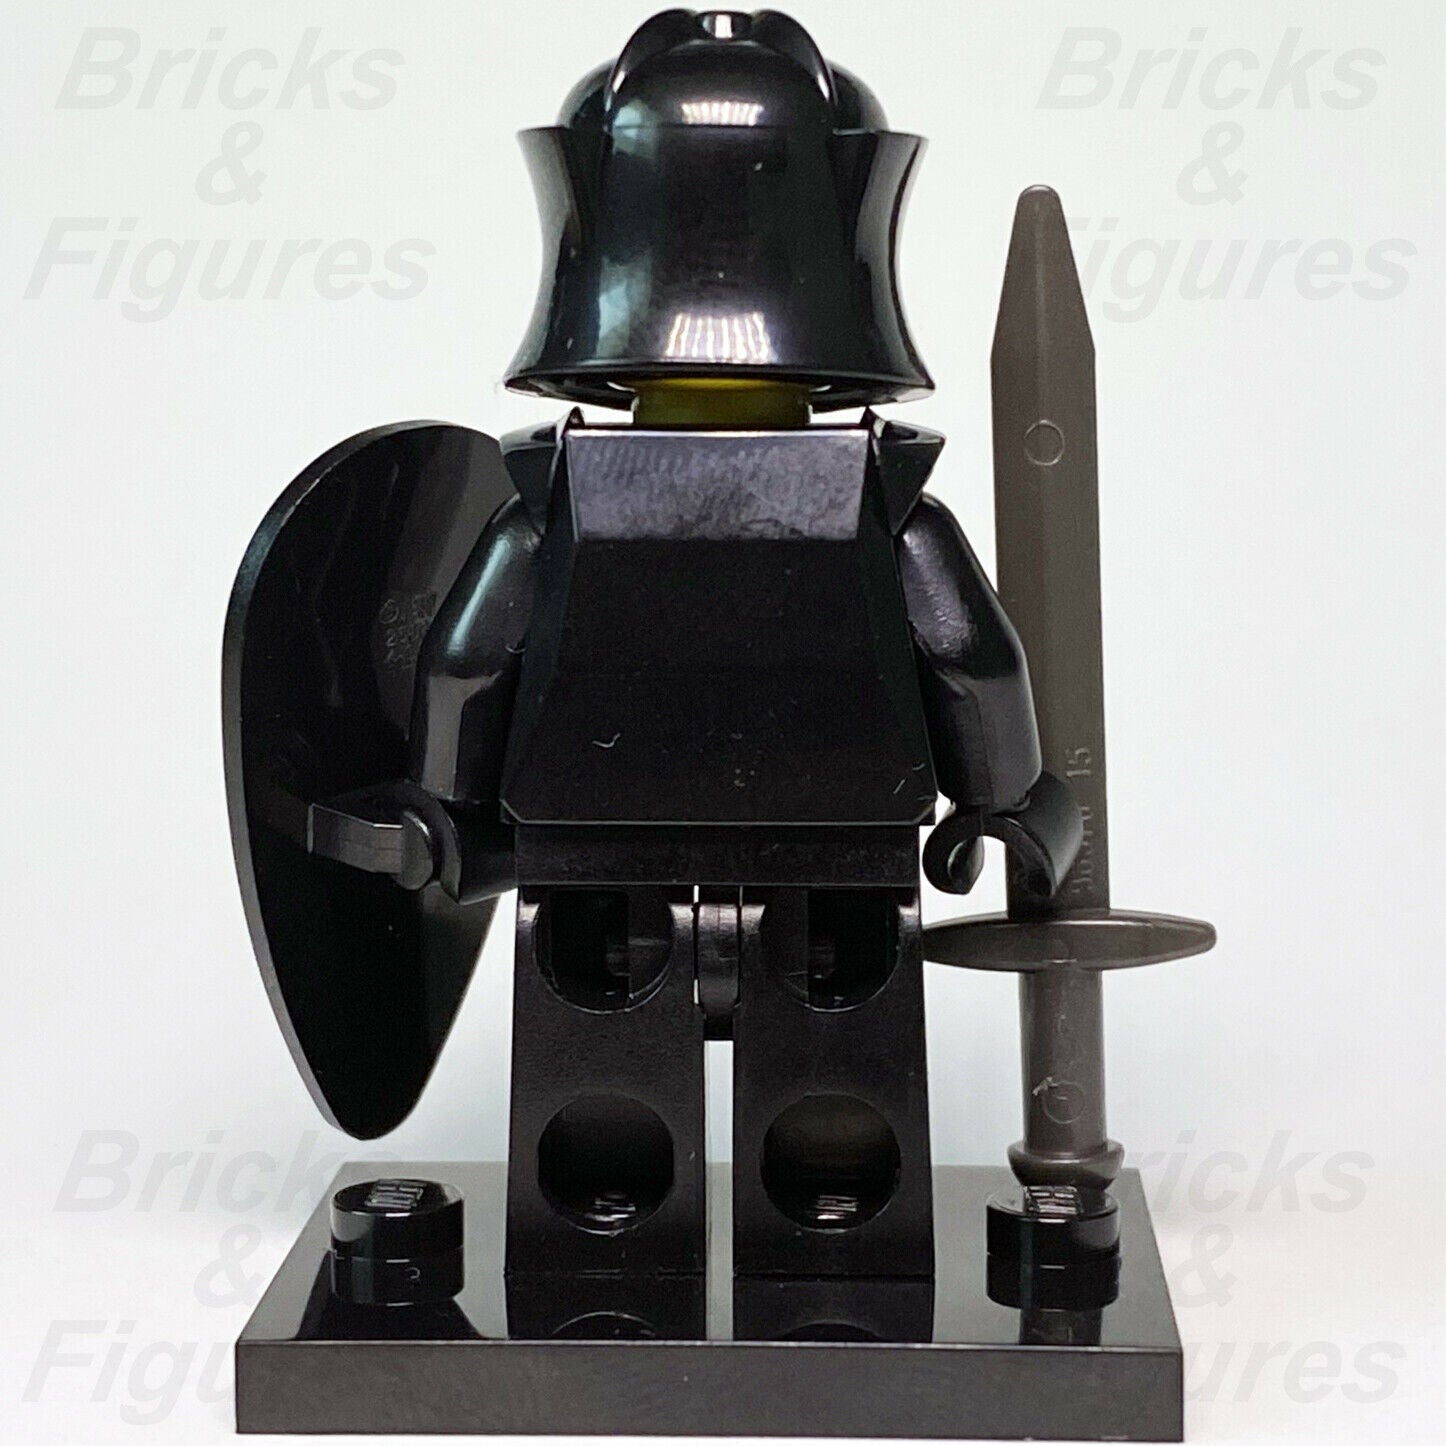 New LEGO Evil Knight Collectible Minifigures Series 7 Rare Minifig 8831 - Bricks & Figures